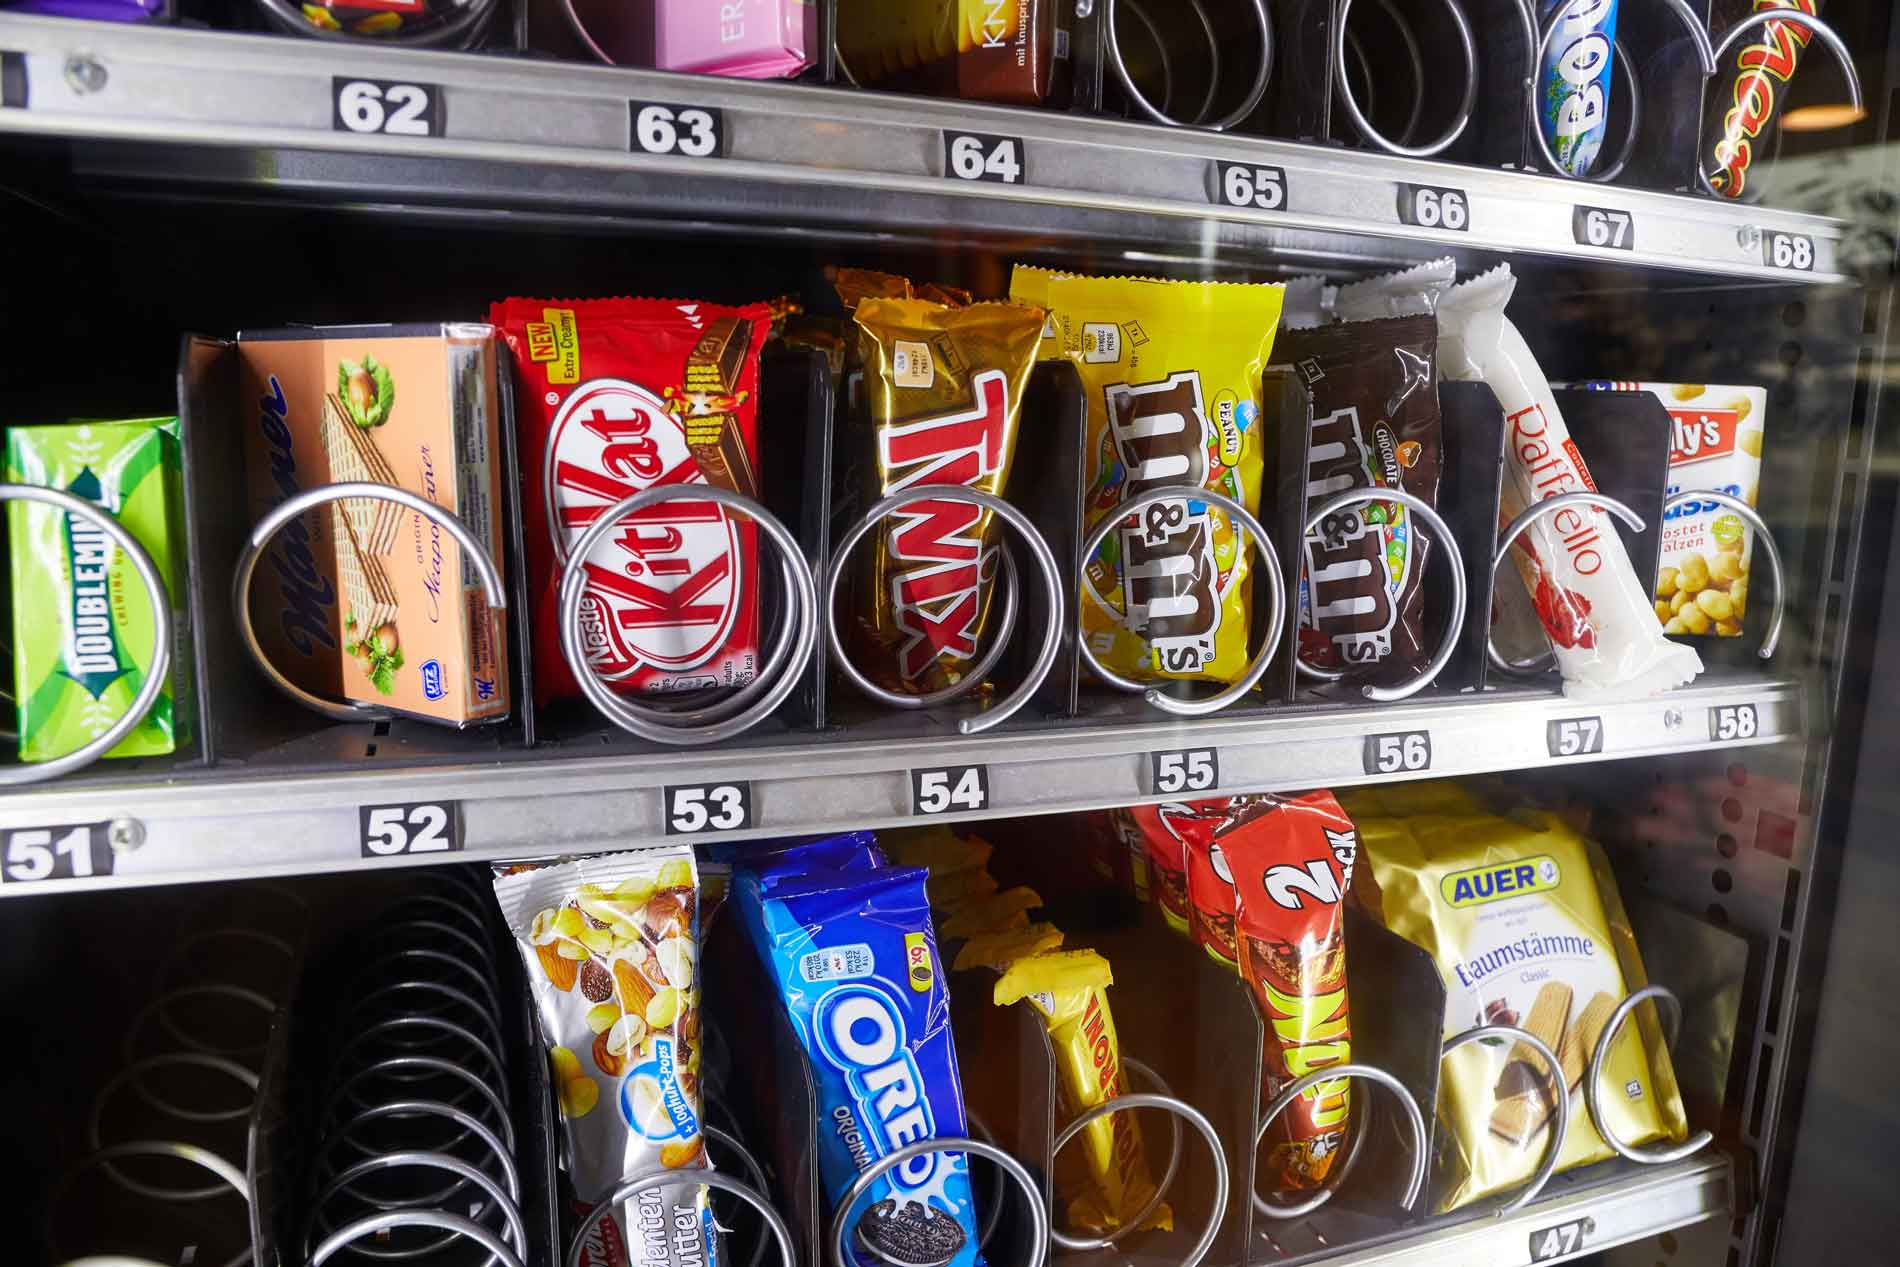 Vending Machines for Sale